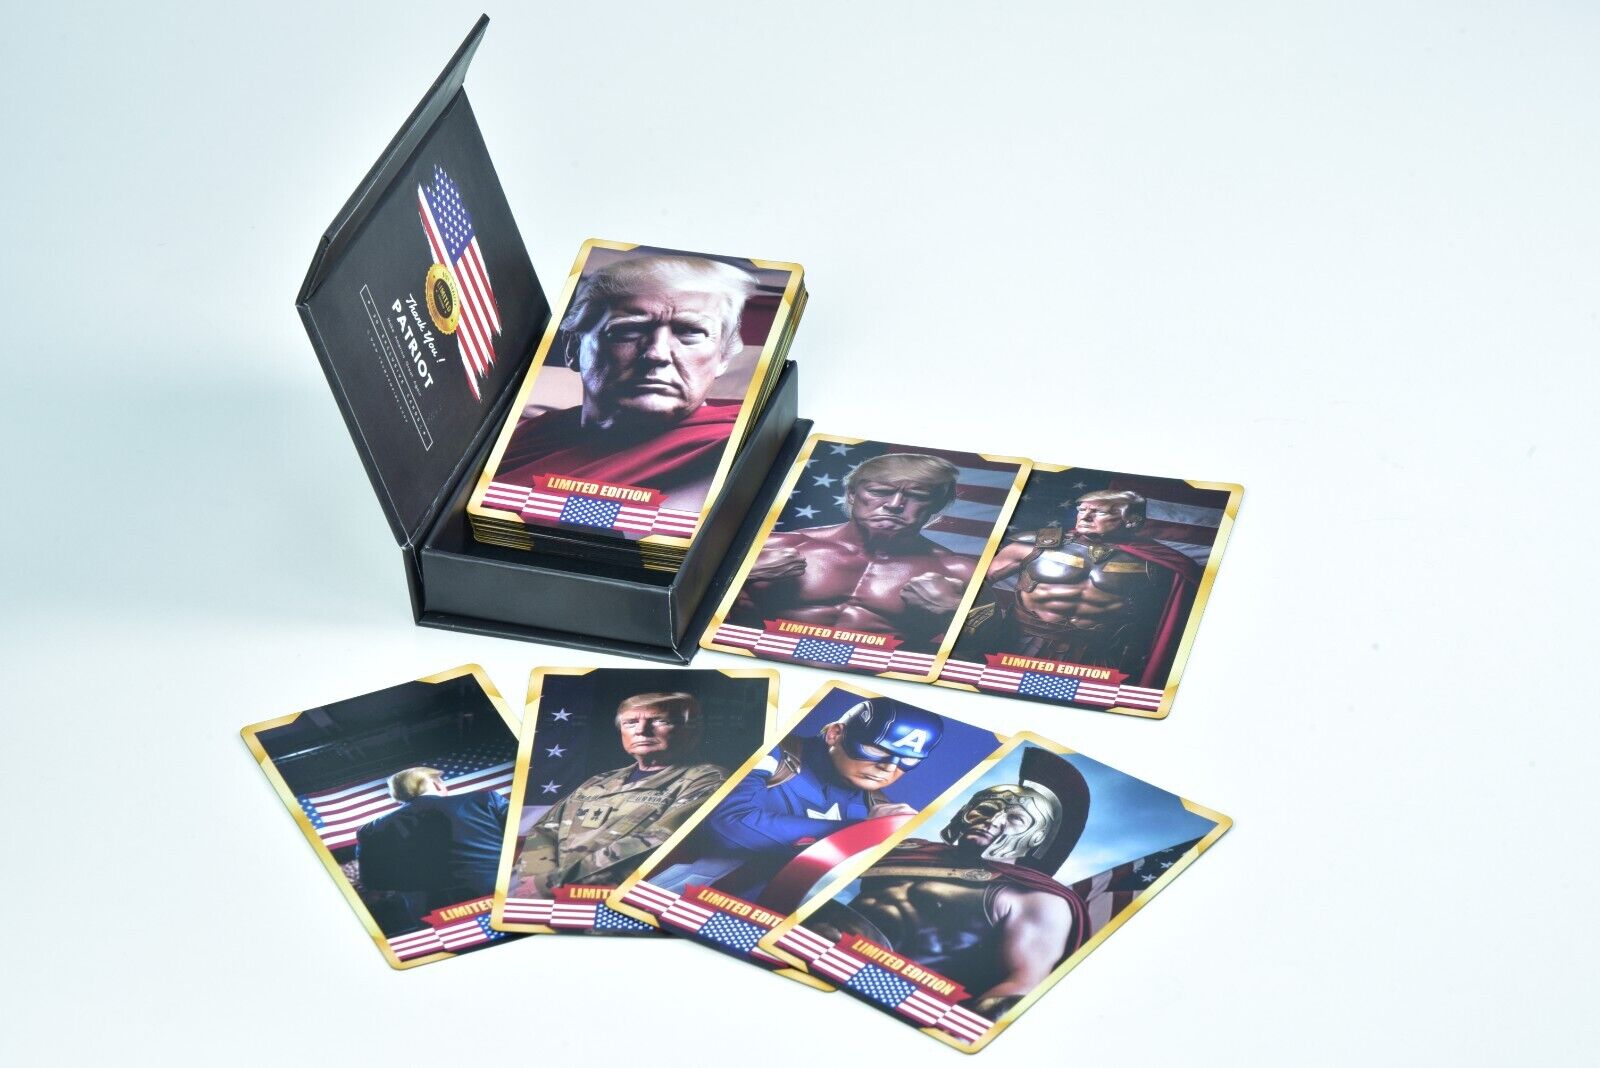 Trump Collector Cards Set | Exclusiv & Limited | 30 High Quality Trump Cards